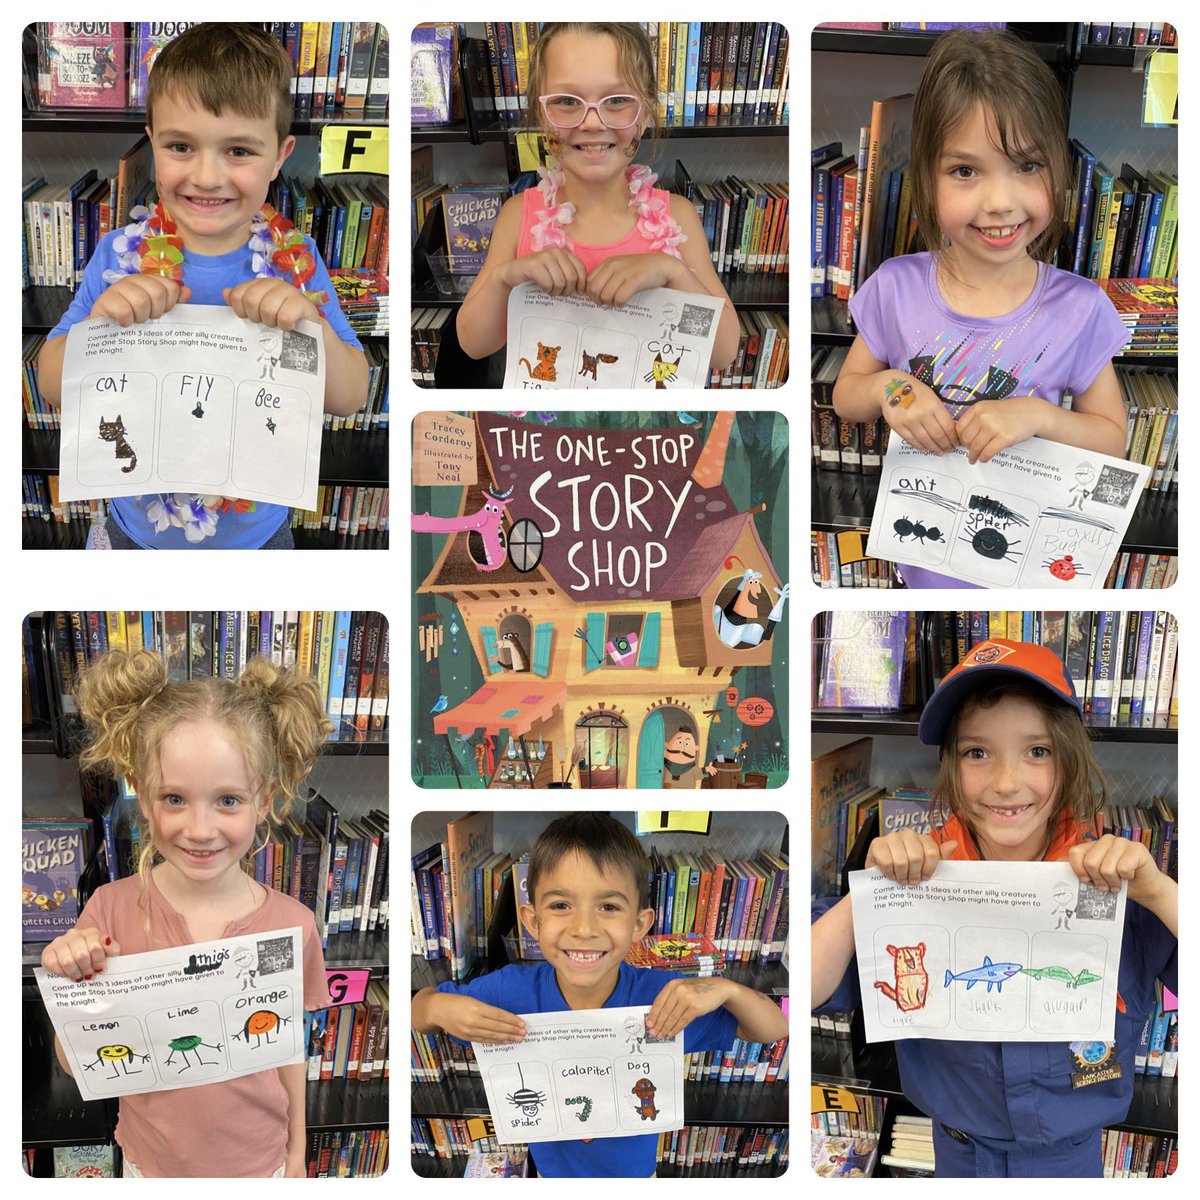 Students loved reading The One Stop Story Shop and coming up with other silly, feisty characters to offer the Knight! @RCCSDLibraries @CookeCardinal @TraceyCorderoy @Tonynealart